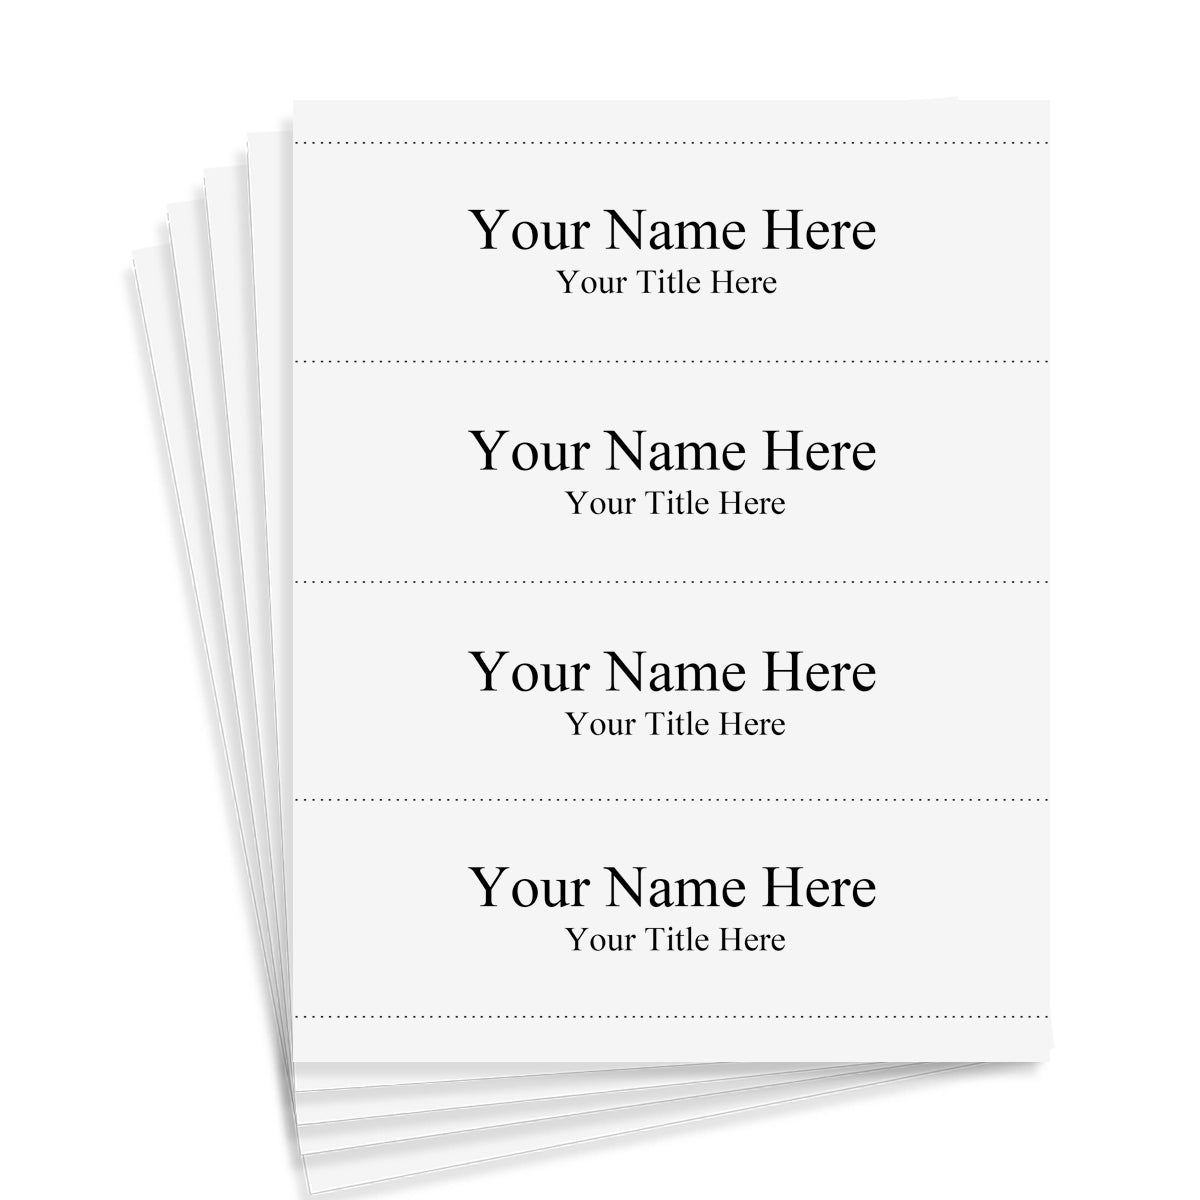 Get Perforated Card Stock - 8-1/2